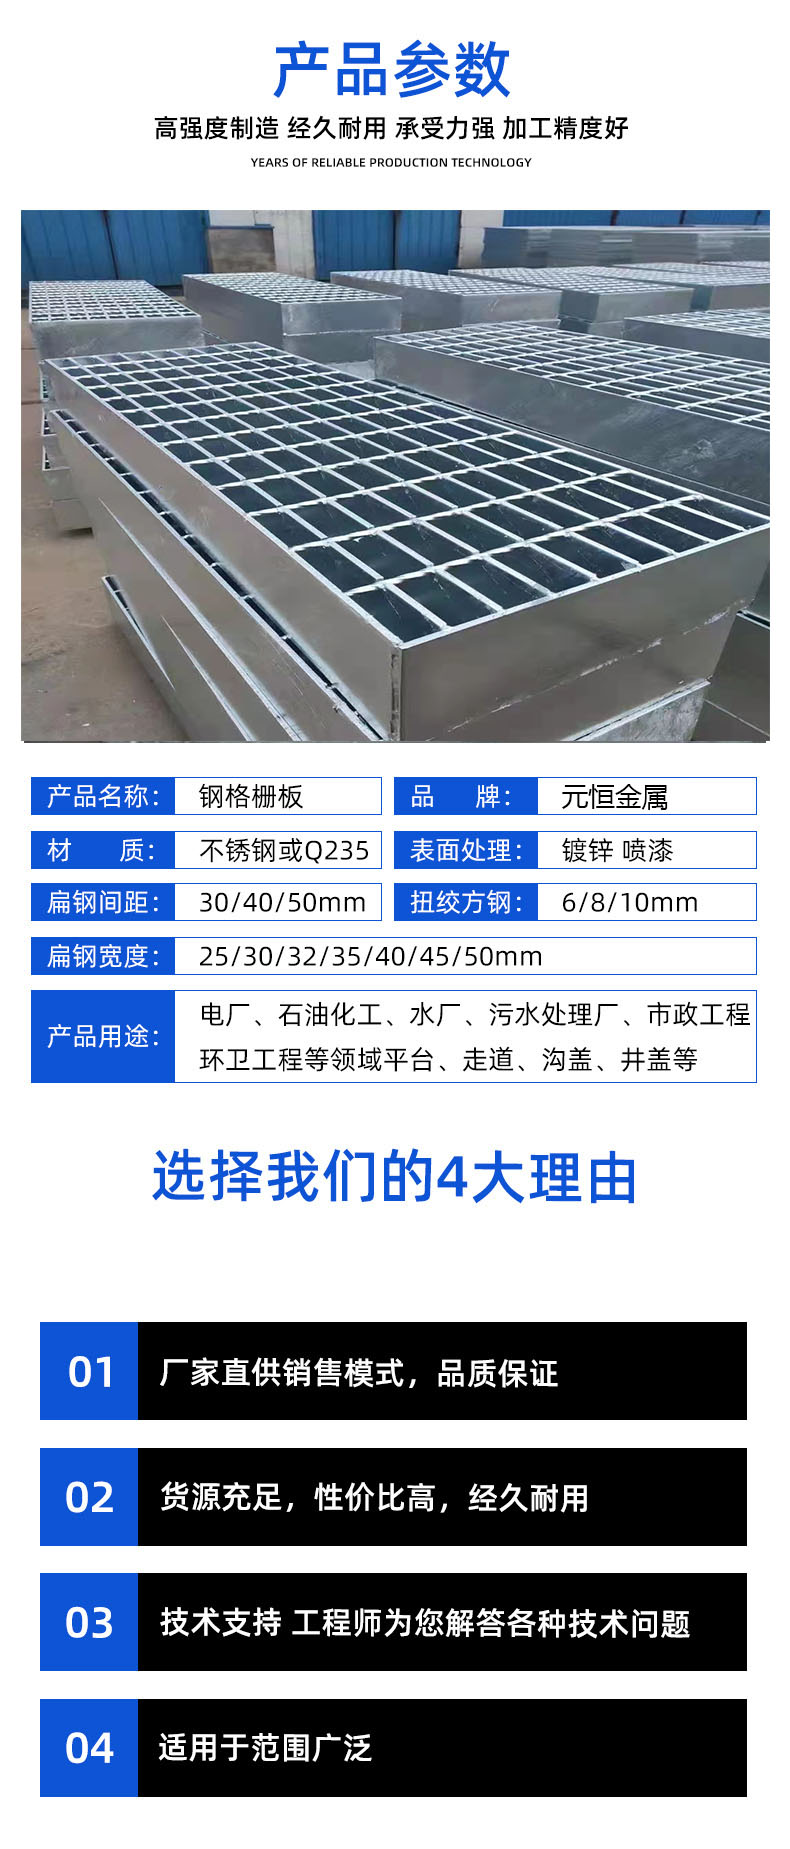 Galvanized steel grating for power plant construction, chemical engineering, rectangular solid business